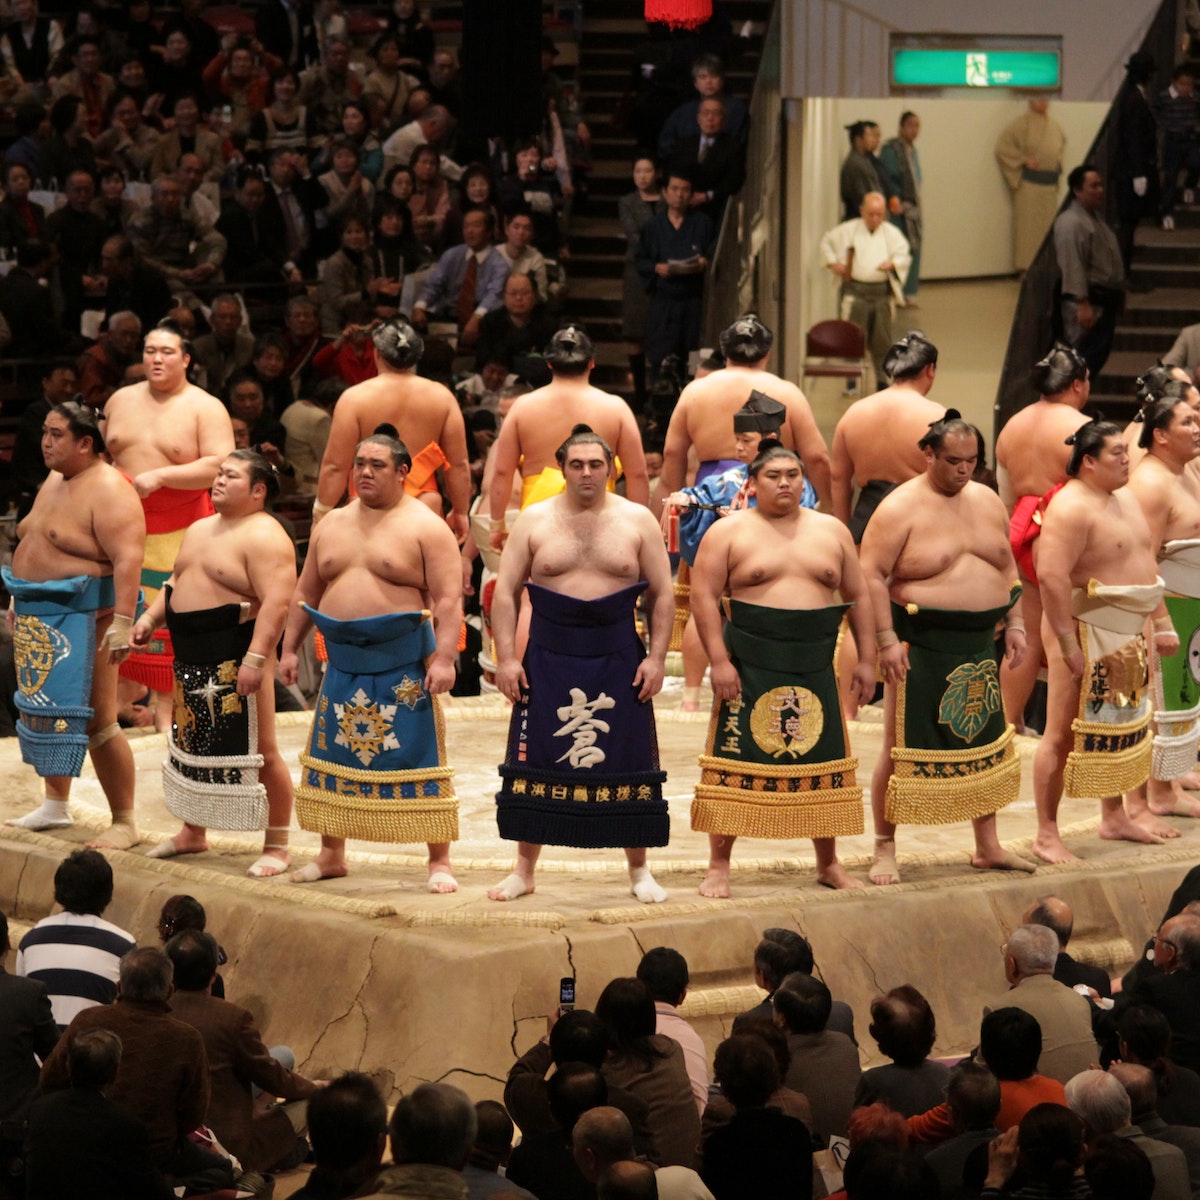 TOKYO - JANUARY 20: High rank sumo wrestlers line up with crowd in the Tokyo Grand Sumo Tournament January 20, 2009 in Tokyo, Japan.; Shutterstock ID 36619300; Your name (First / Last): Laura Crawford; GL account no.: 65050; Netsuite department name: Online Editorial; Full Product or Project name including edition: Japan page Top Experiences images